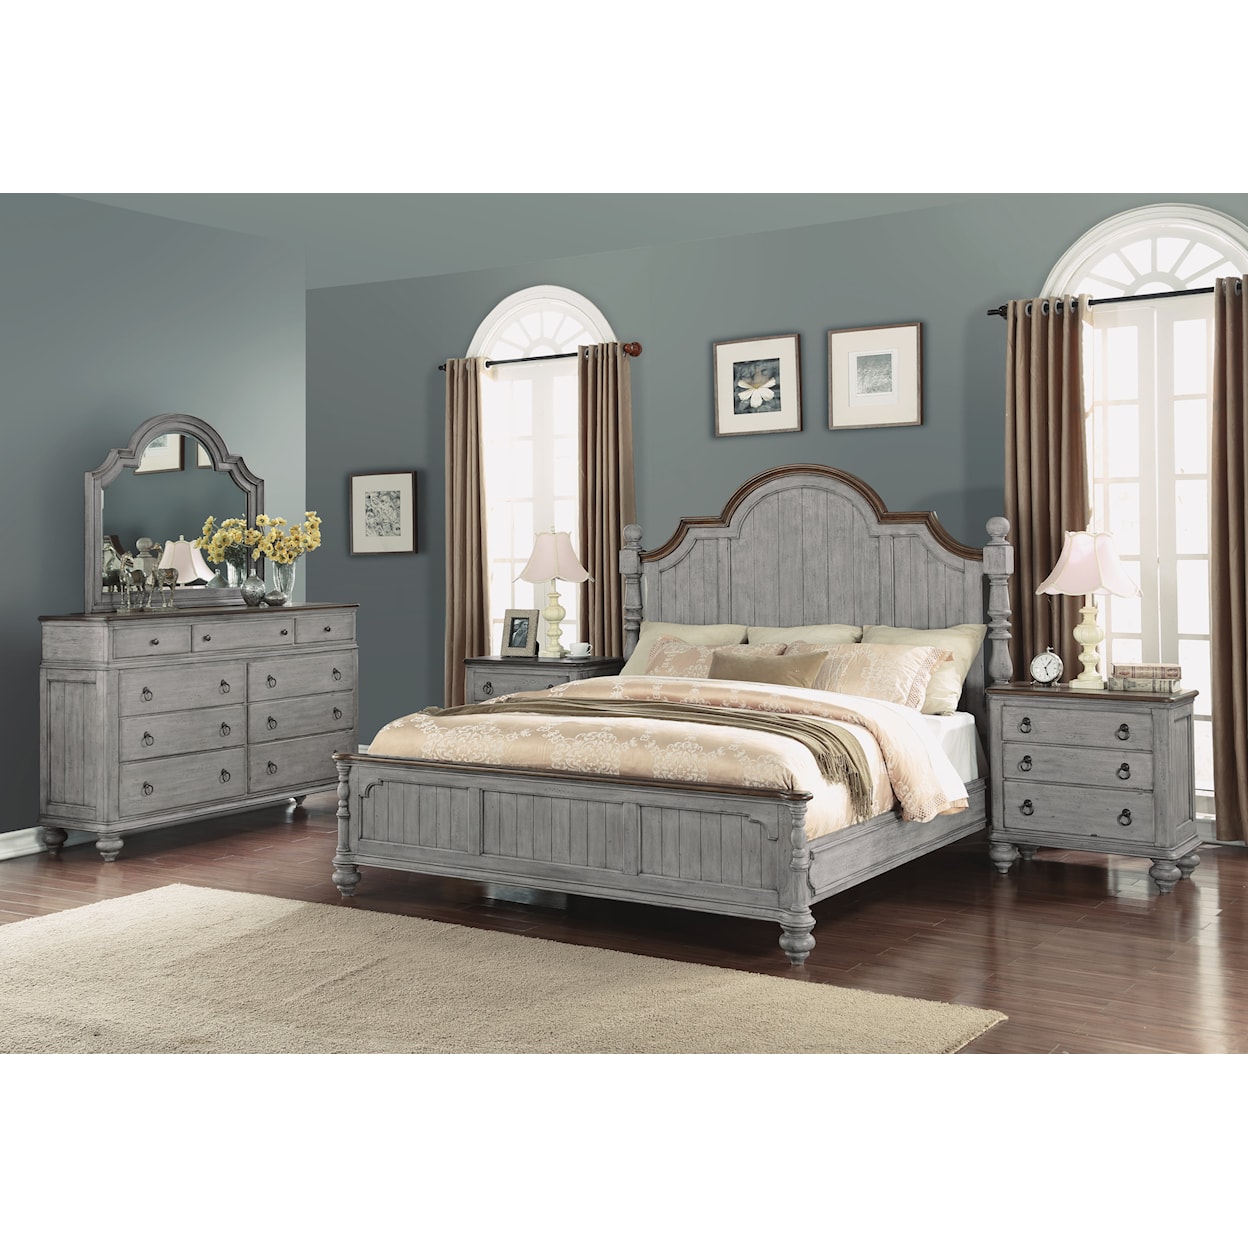 Flexsteel Wynwood Collection Plymouth King Bedroom Group